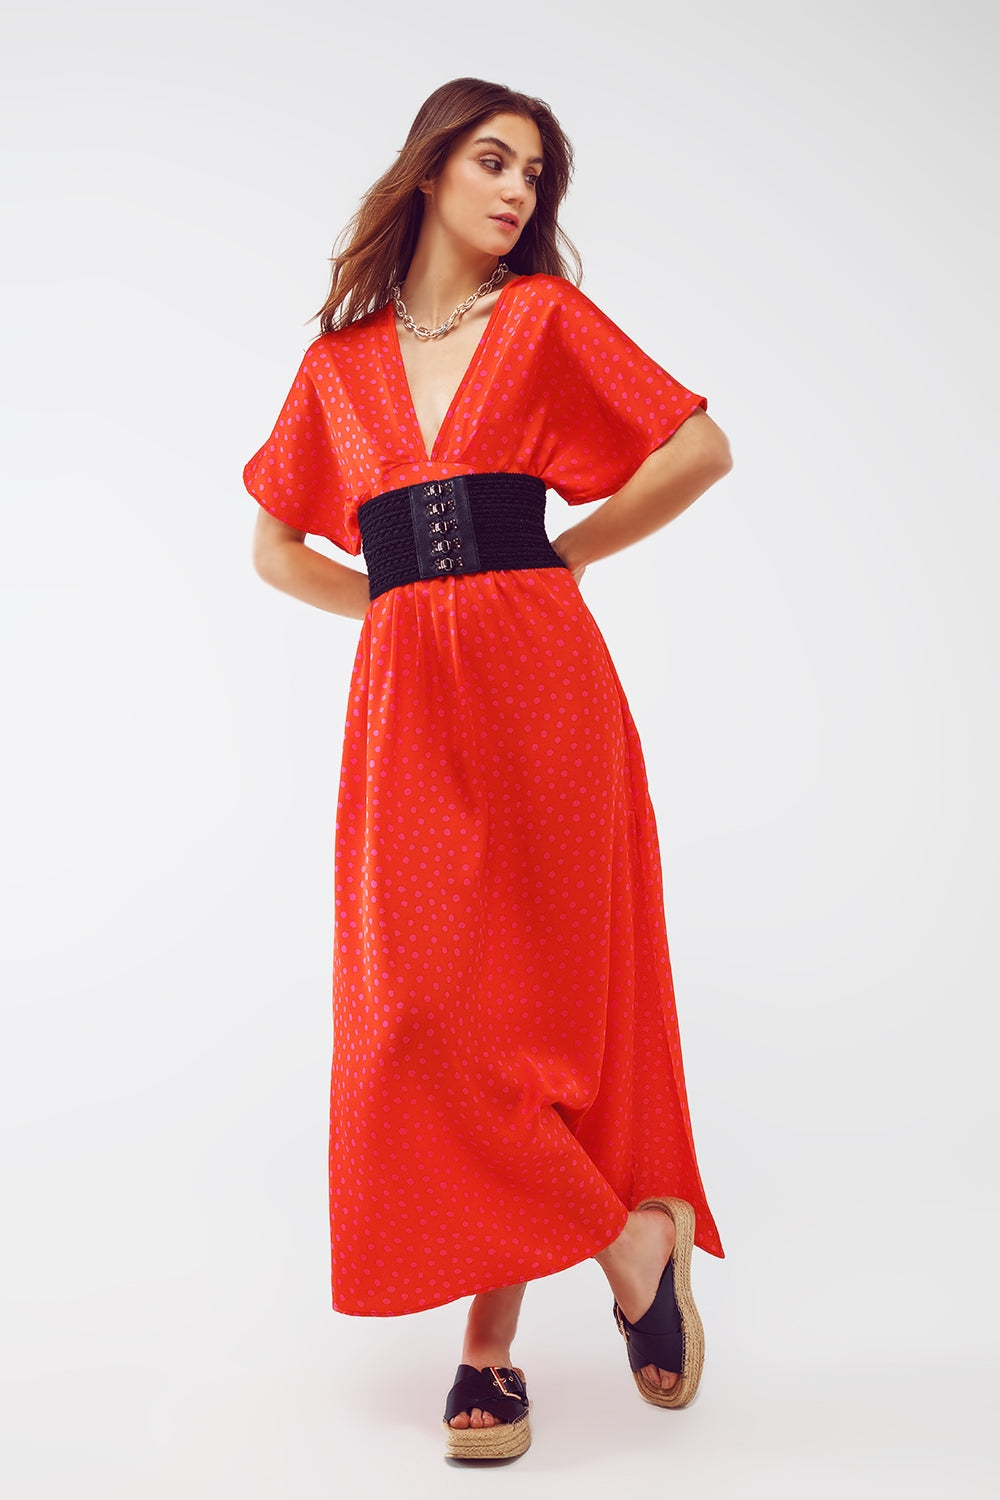 Q2 Maxi Cinched At The Waist Dress With Angel Sleeves In Red Polka Dot